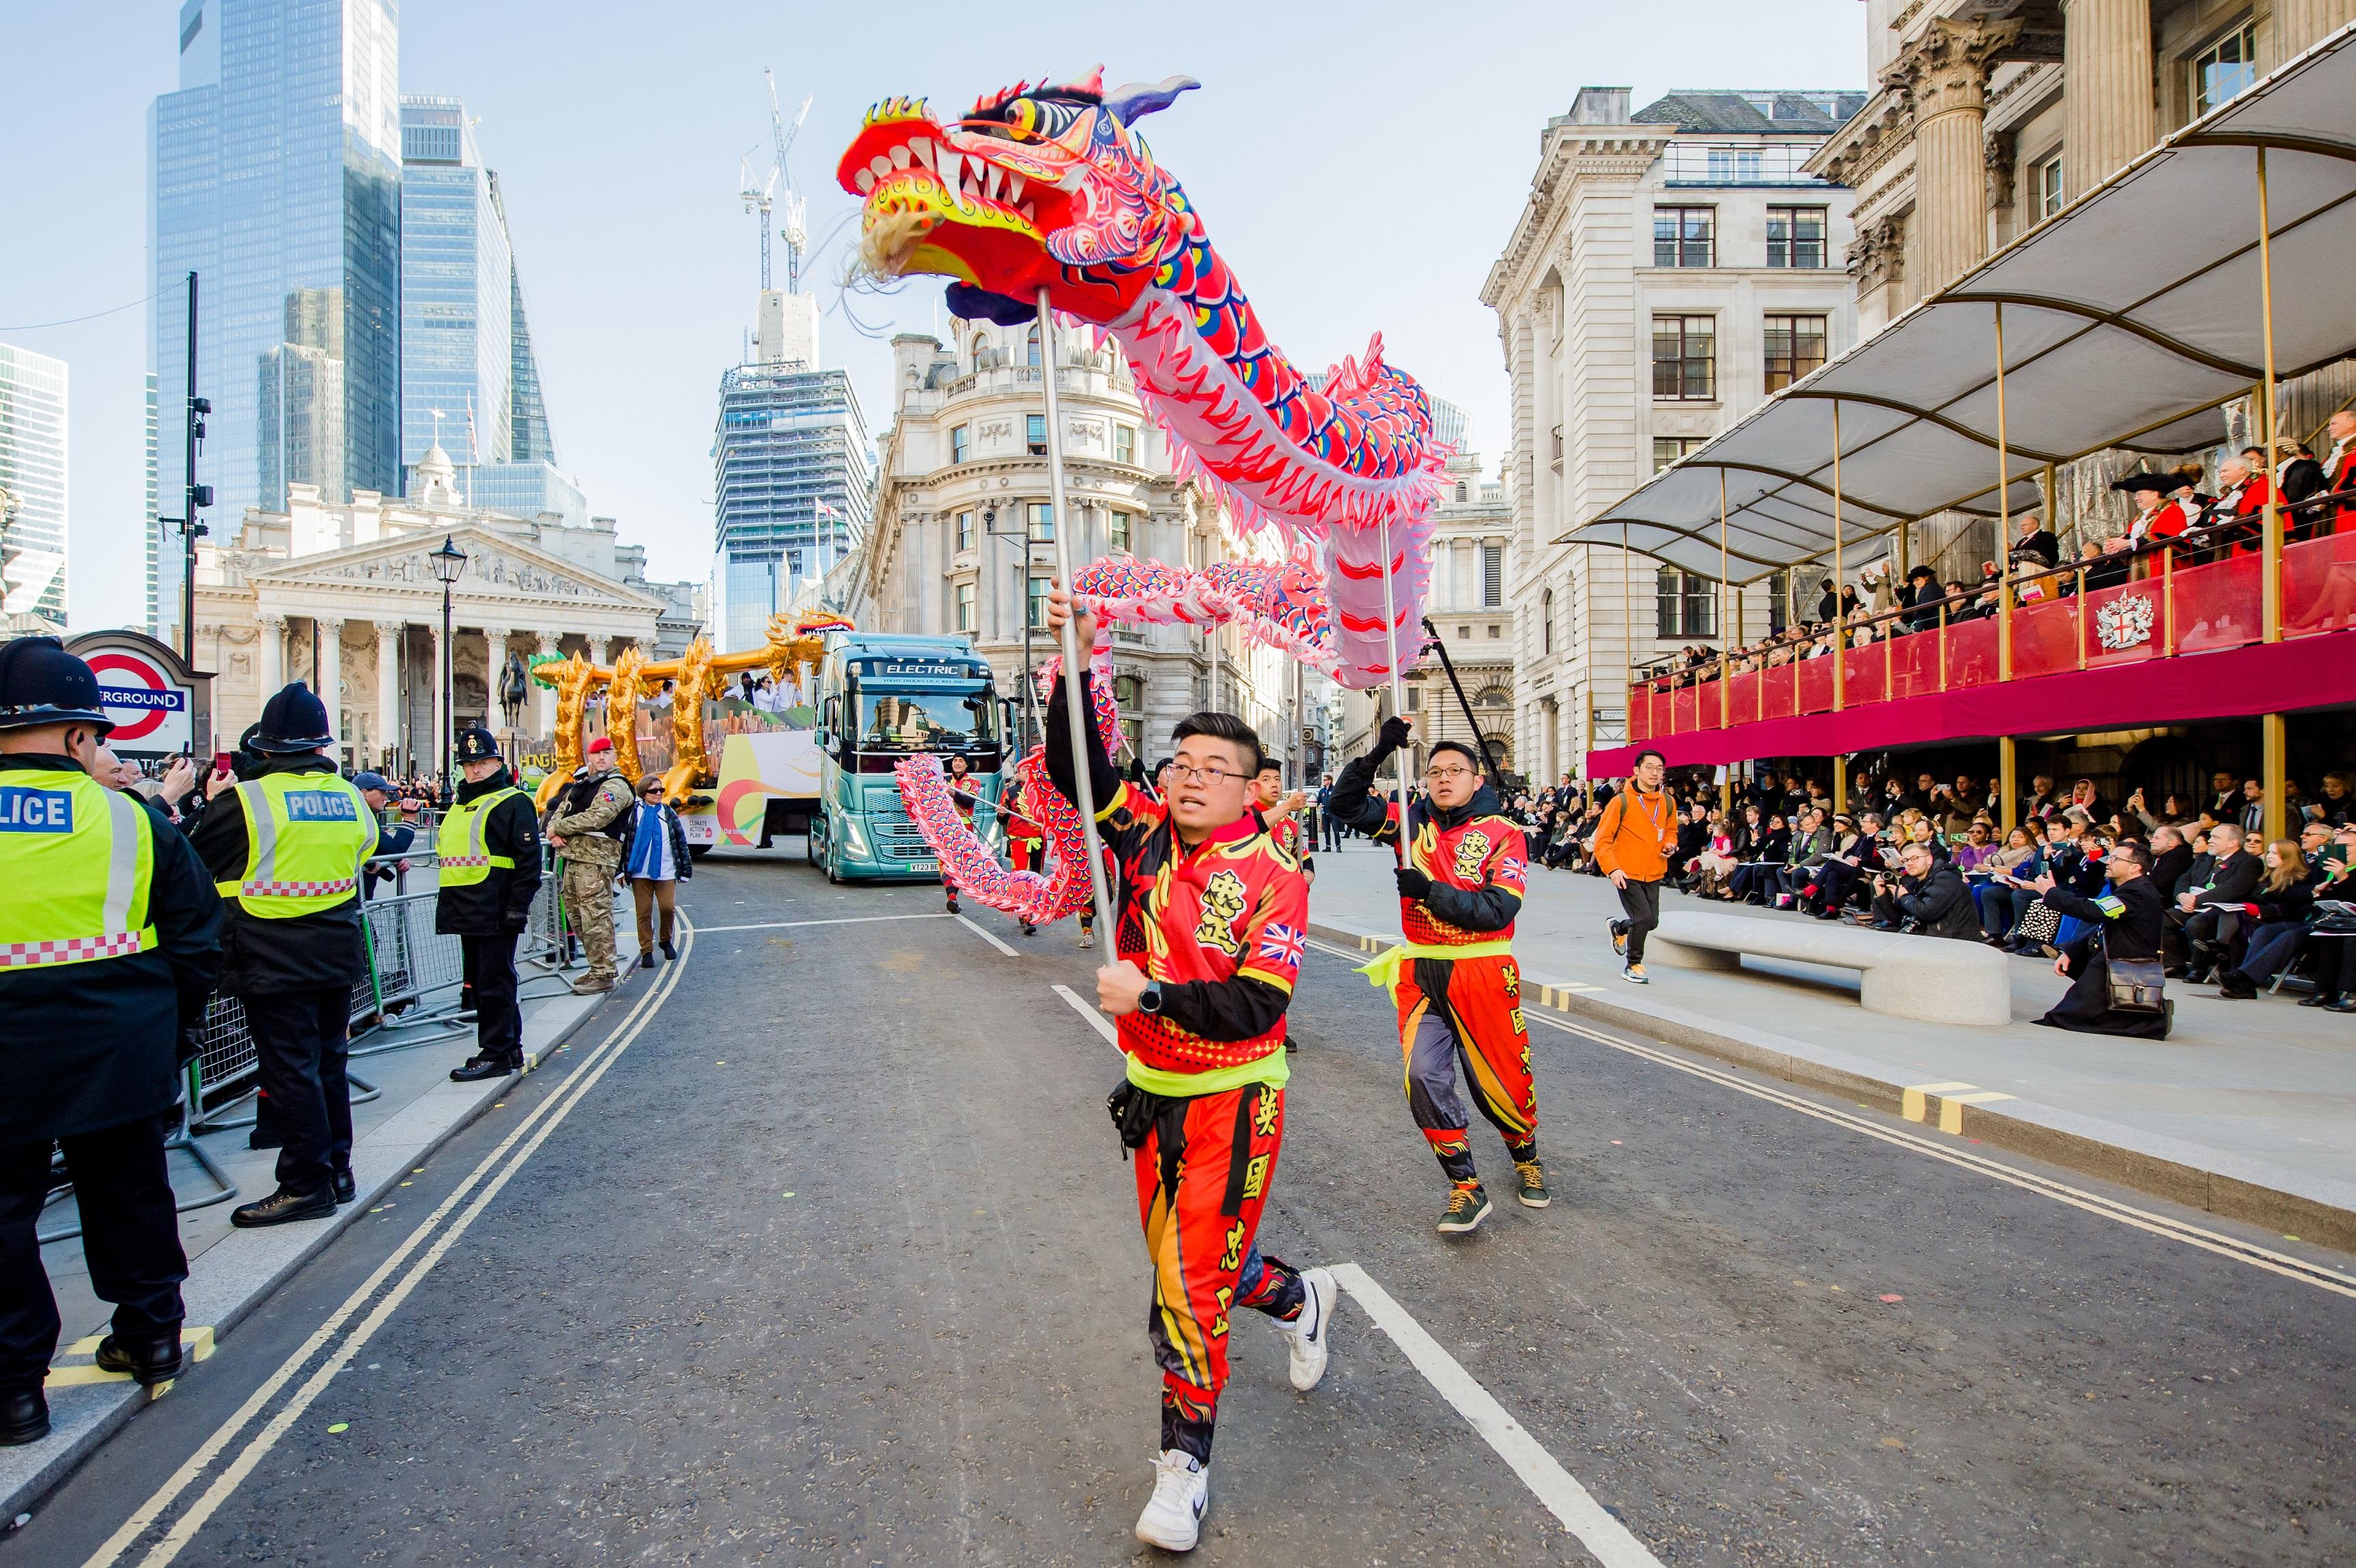 The Hong Kong Economic and Trade Office, London took part in the City of London Lord Mayor's Show on November 11 (London time) with a float highlighting Hong Kong's plan to achieve carbon neutrality before 2050. Photo shows the float passing the grandstand at the Mansion House.